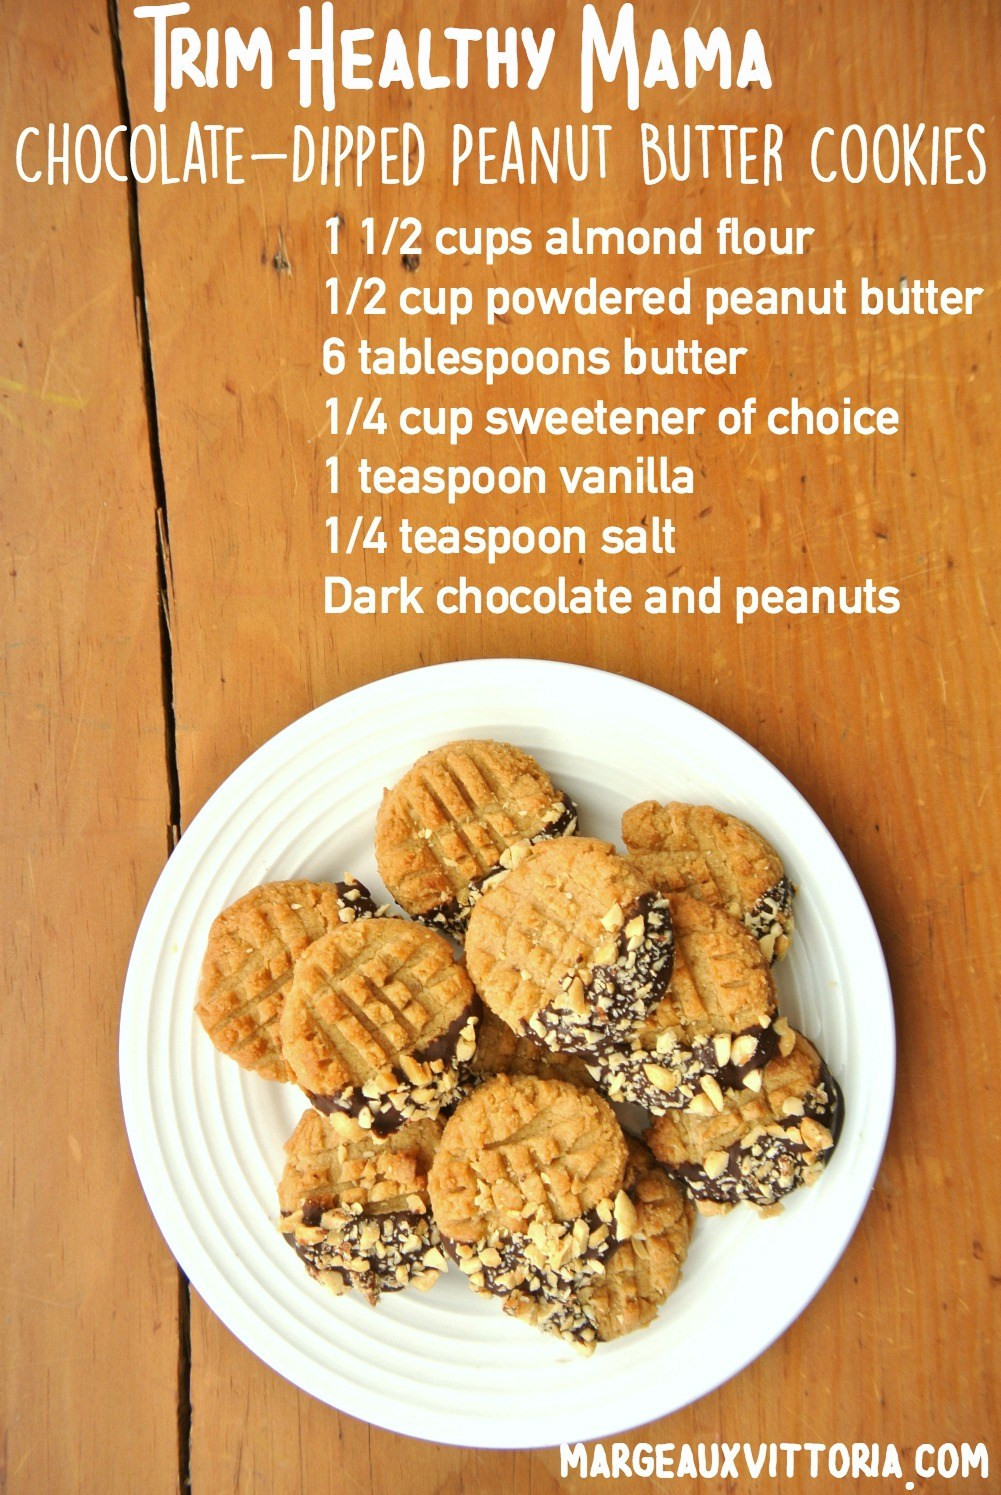 Powdered Peanut Butter Recipes Low Carb
 Chocolate Dipped Peanut Butter Cookies